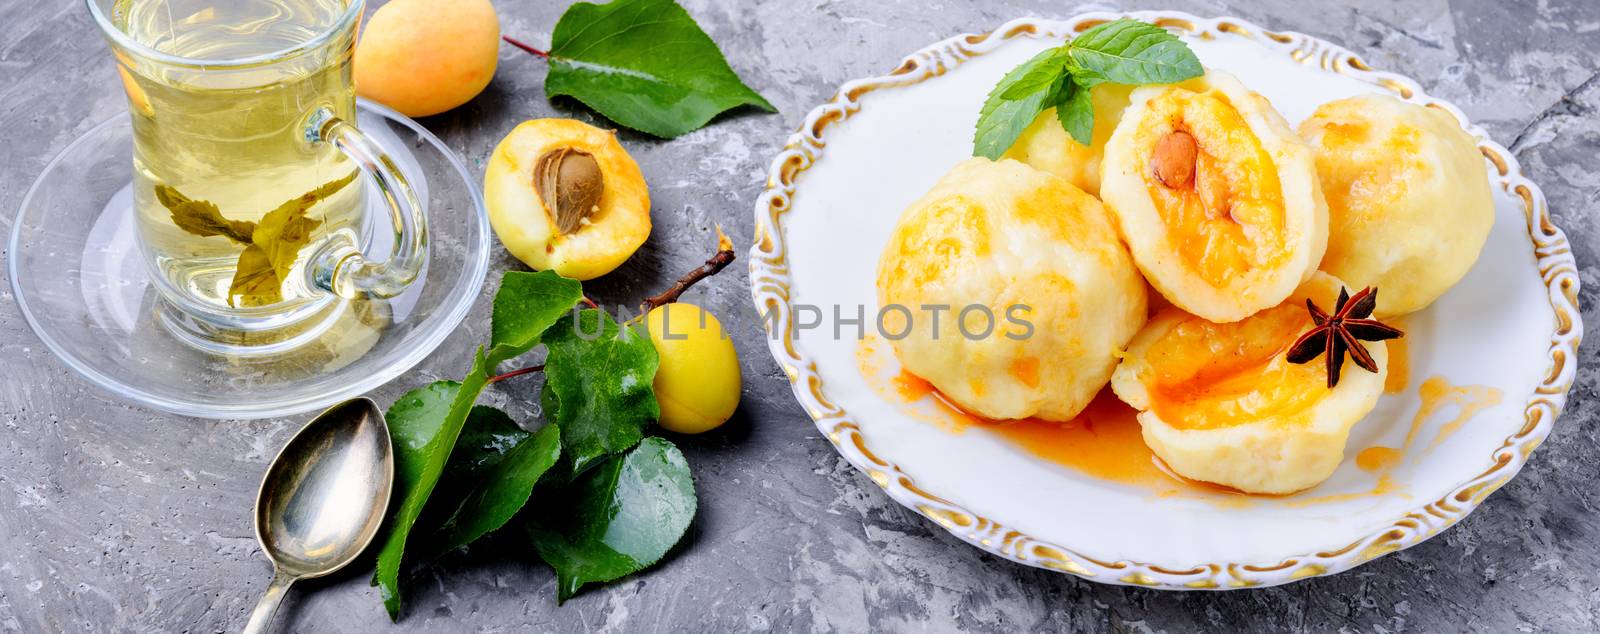 National dish of Czech and Slovak cuisine of dumplings with apricot